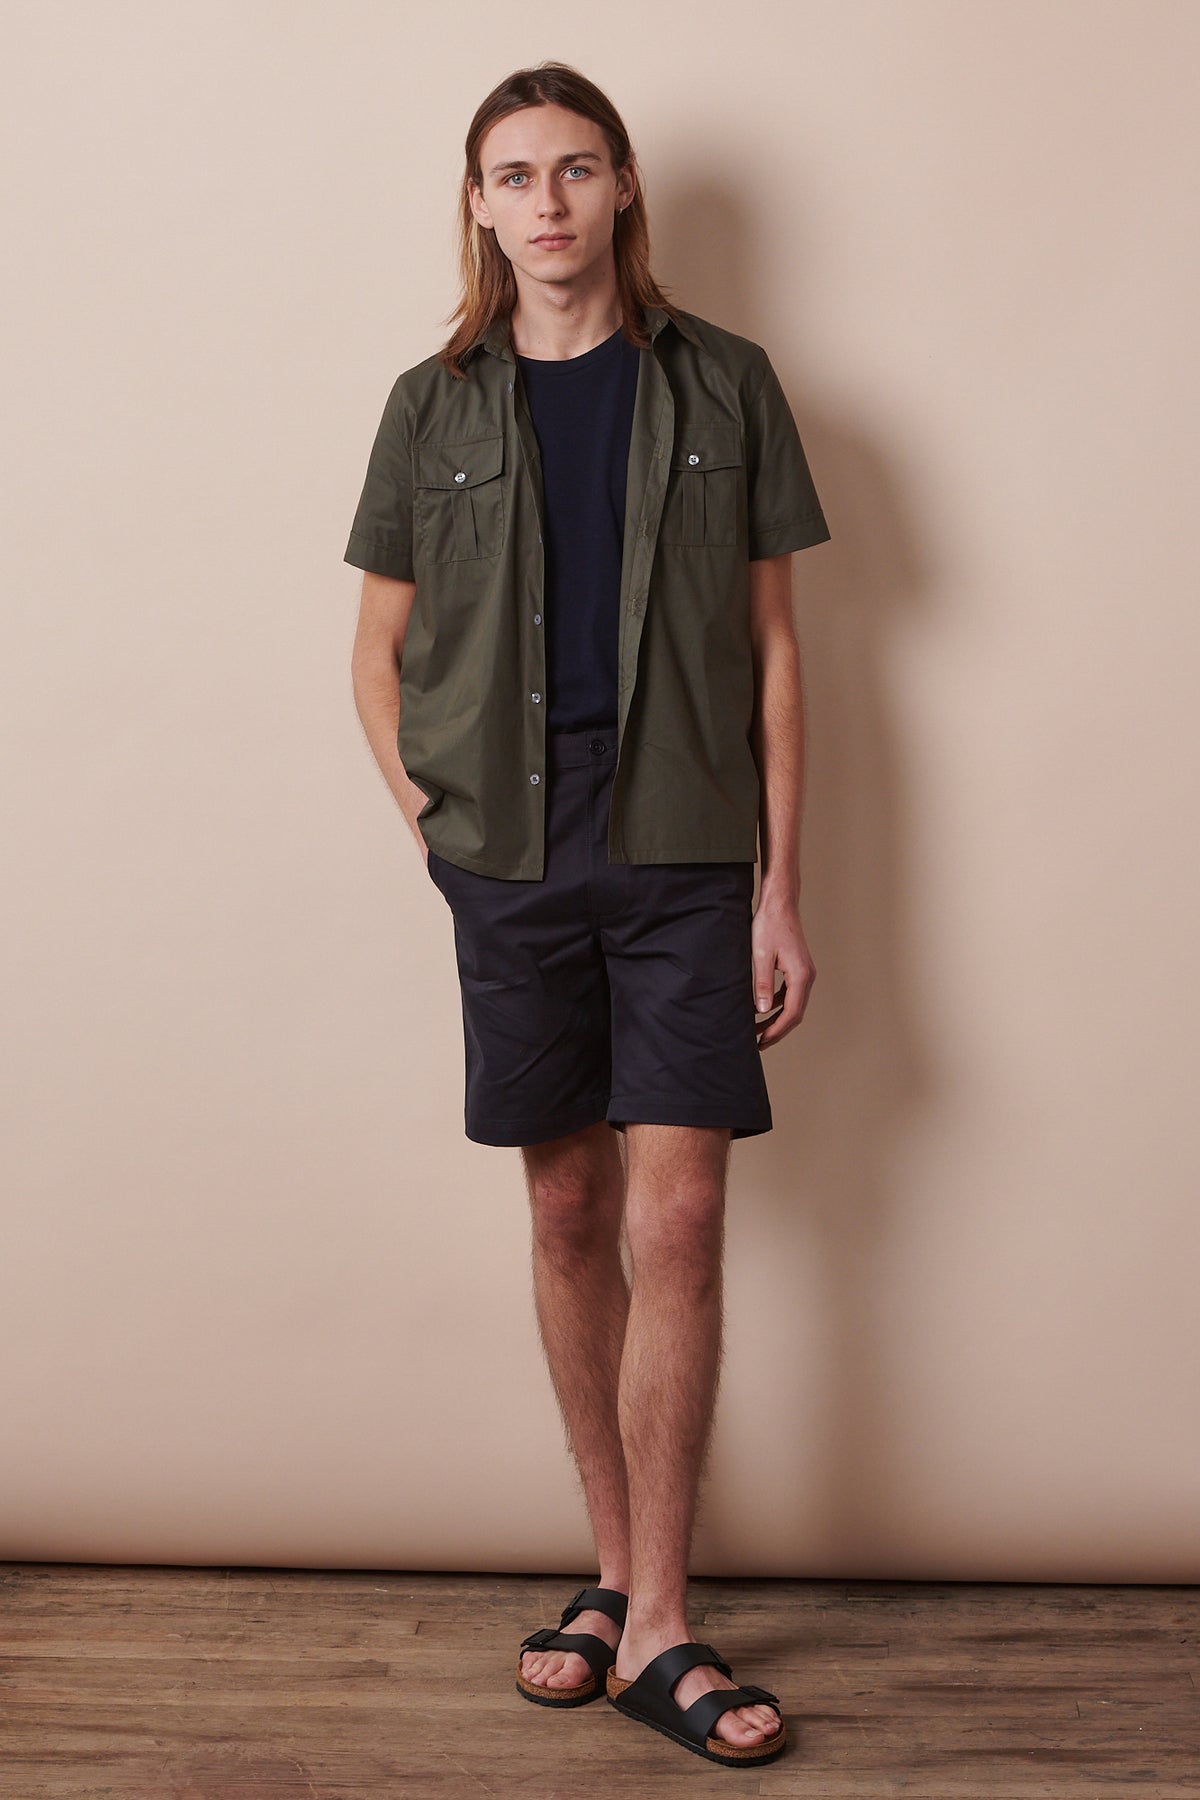 
            Full body image of white male wearing Classic shorts in dark navy with unbuttoned military shirt in olive